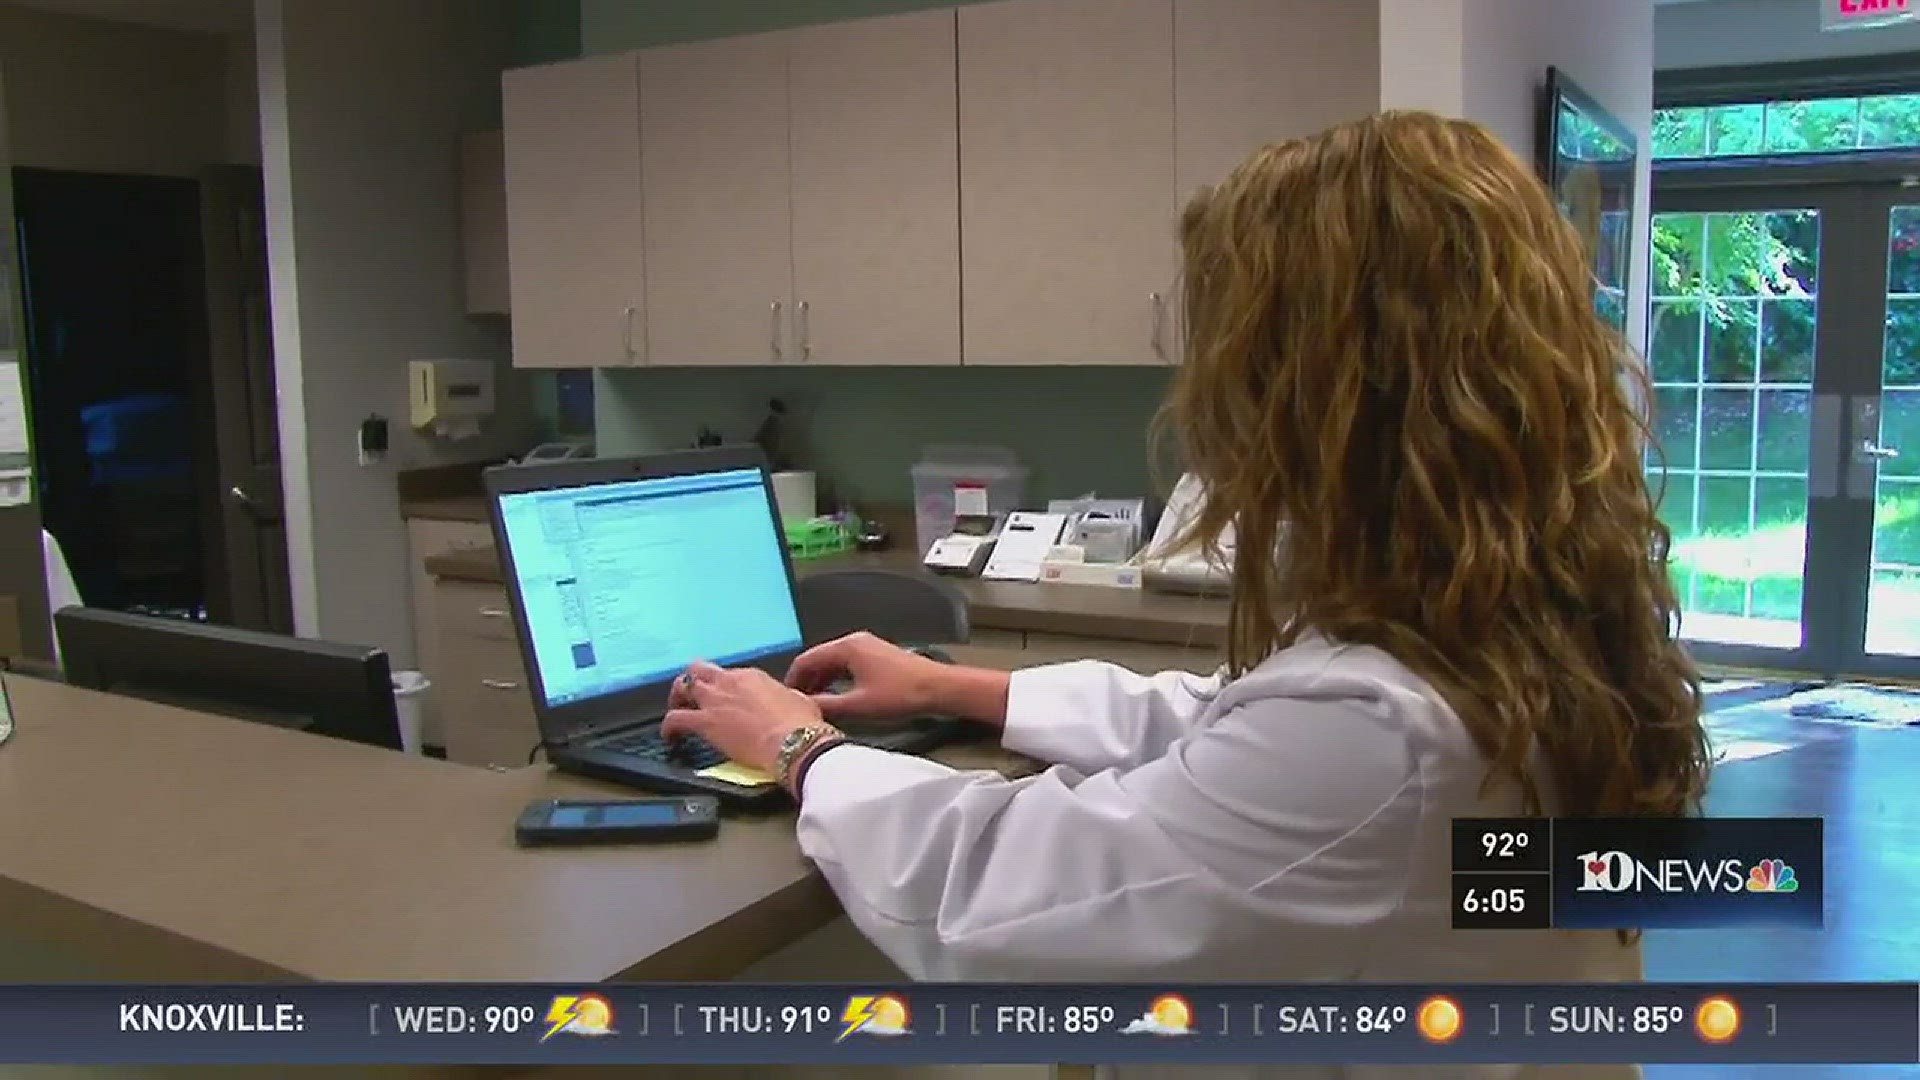 10News reporter Rachel Wittel has more on a new service doctors are offering. (6/14/16)